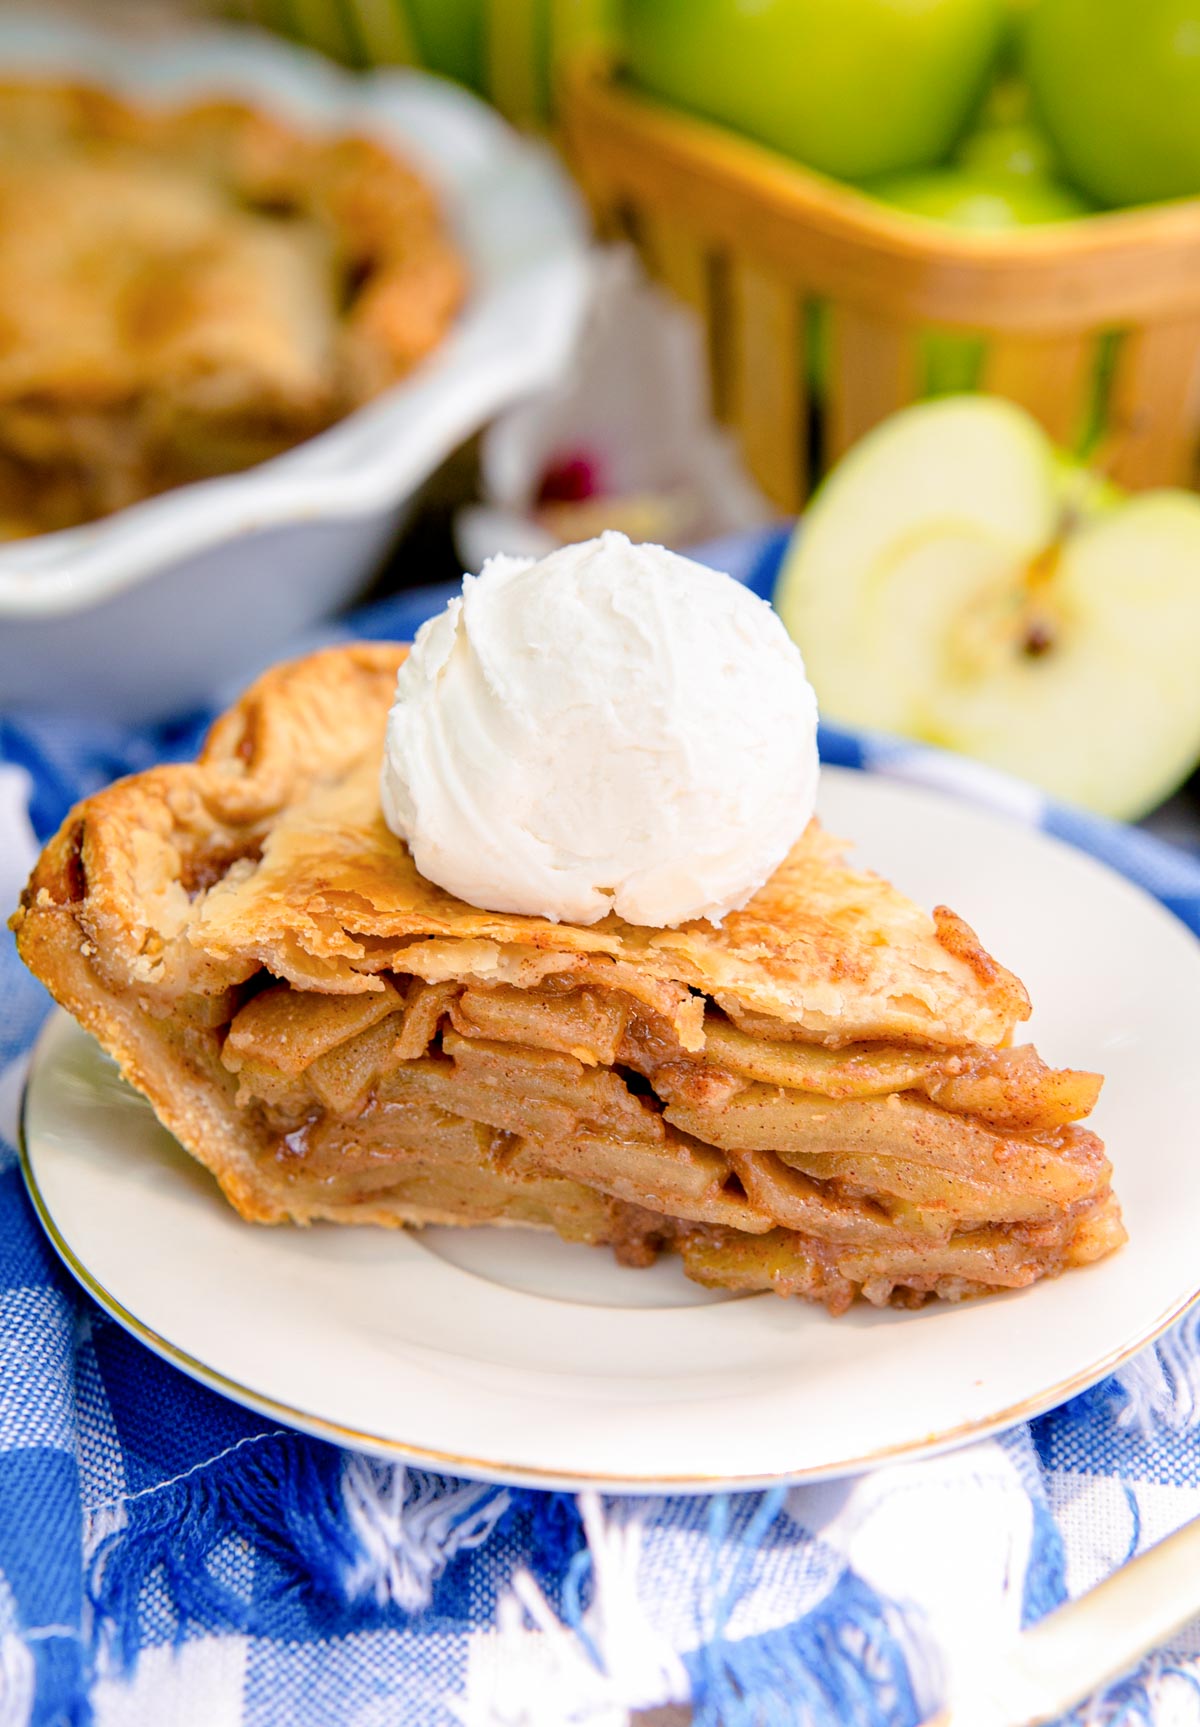 Close up photo of a slice of apple pie on a white plate on a blue gingham napkin with a basket of apples and the rest of the pie in the background.